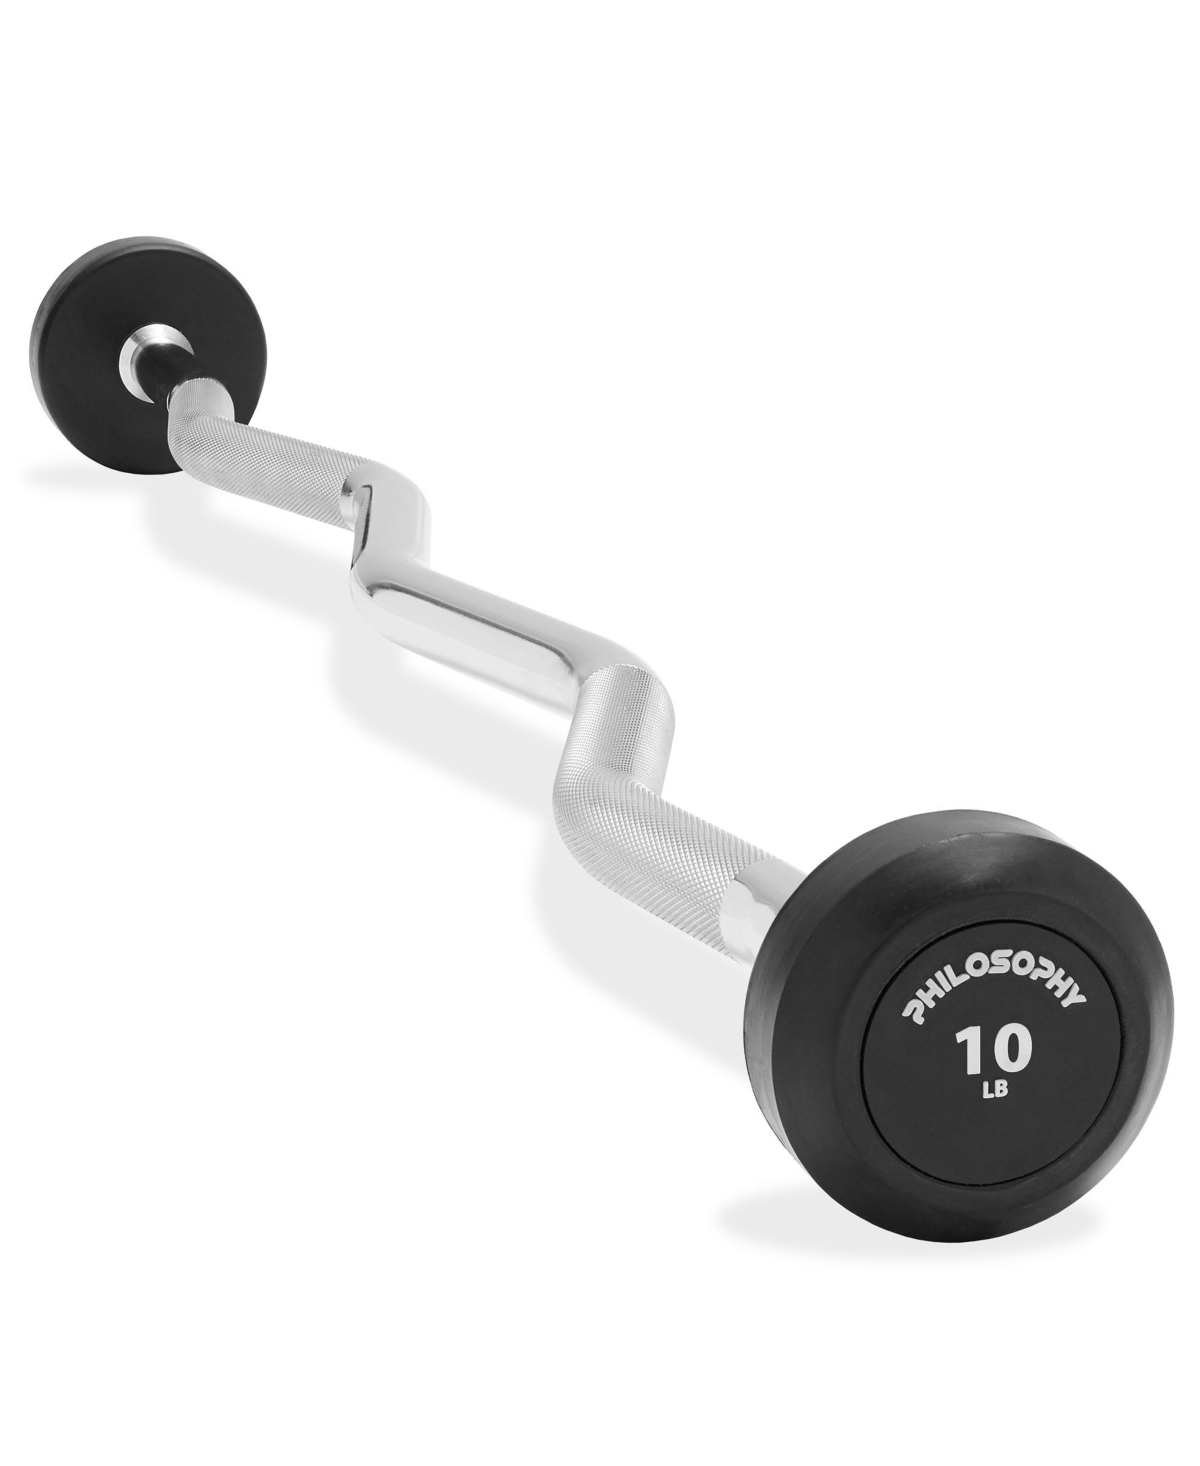 Rubber Fixed Barbell, 10 Lb Pre-Loaded Weight Ez Curl Bar for Strength Training & Weightlifting - Black